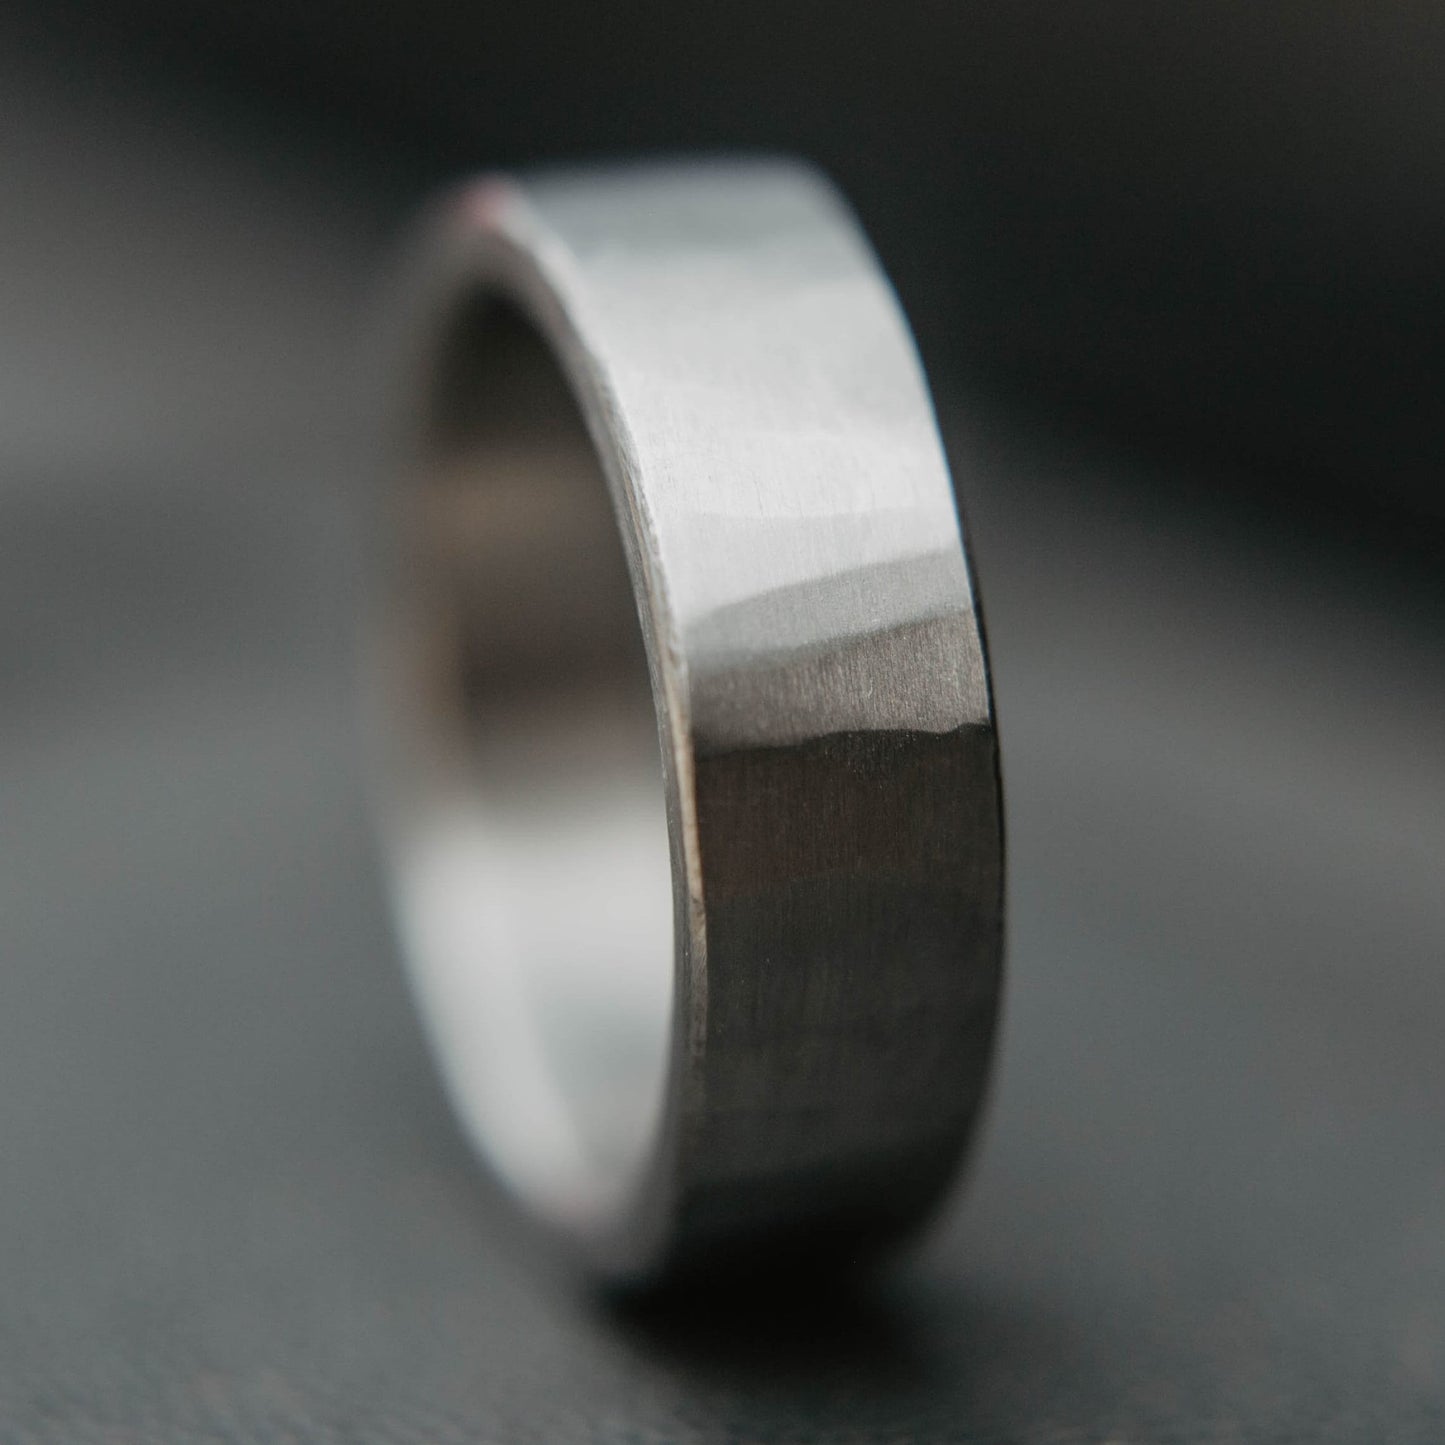 Mens titanium wedding band. This photo shows a lightly faceted gray titanium ring. (Vertical with black background)